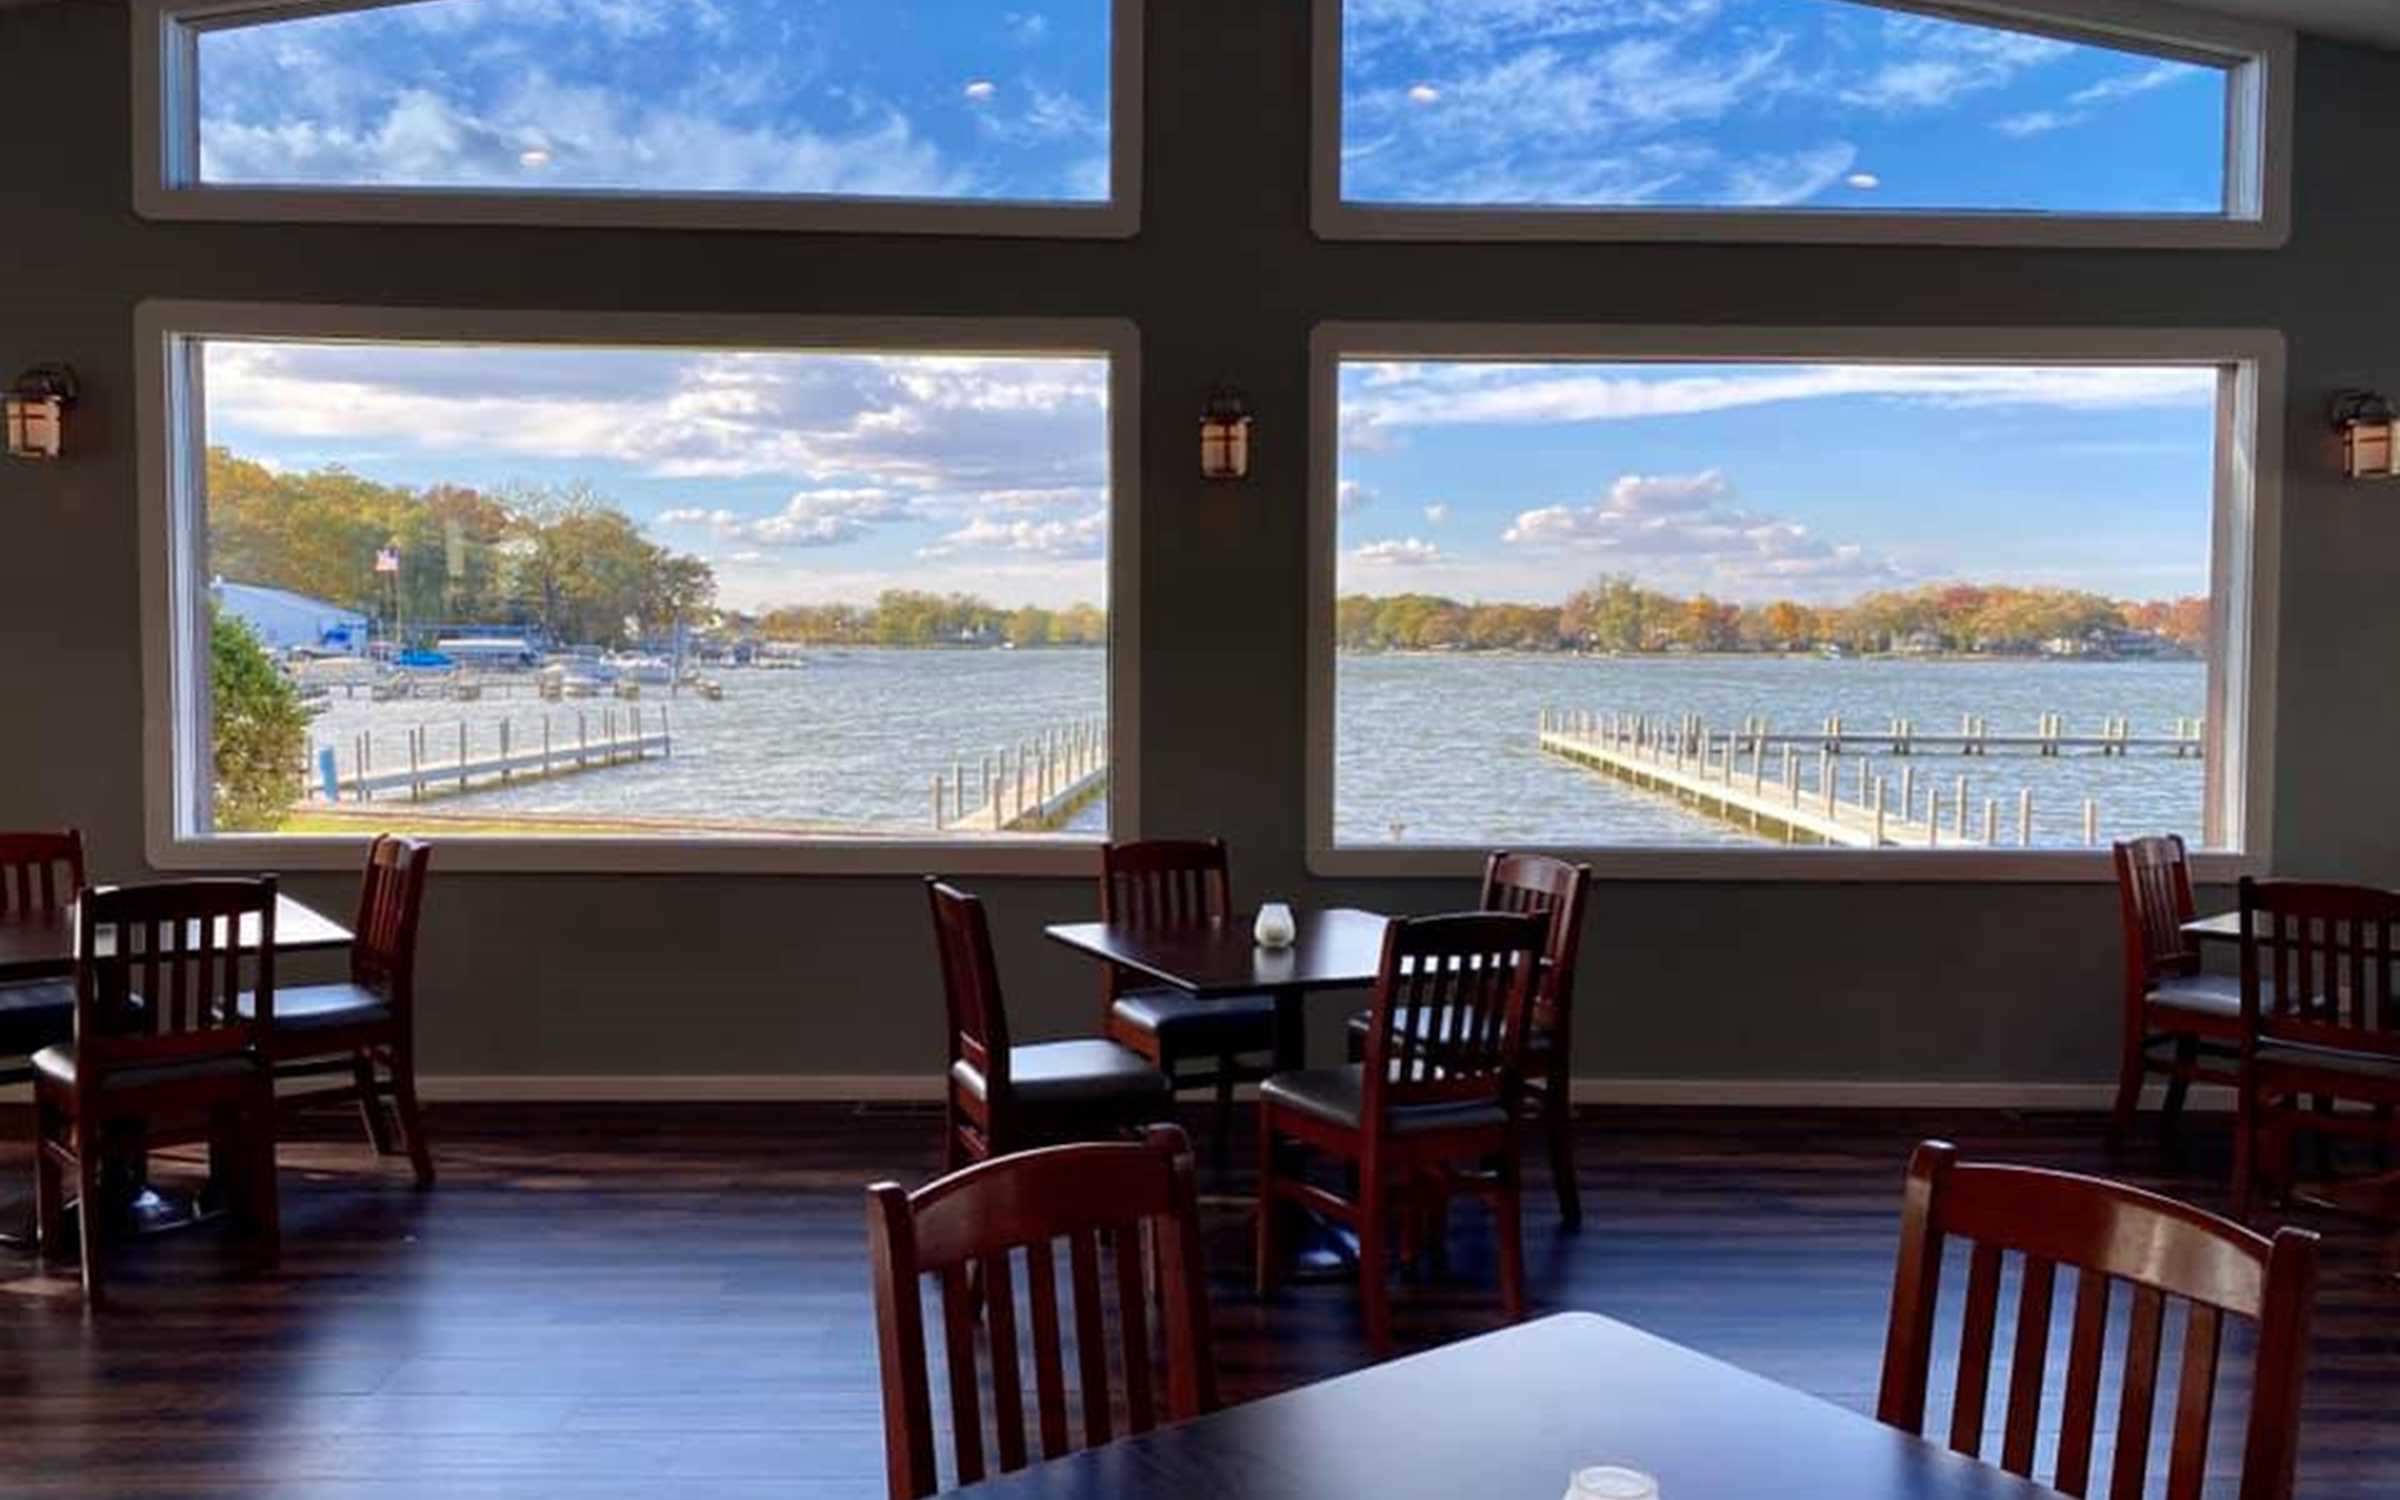 Dining room overlooking lake